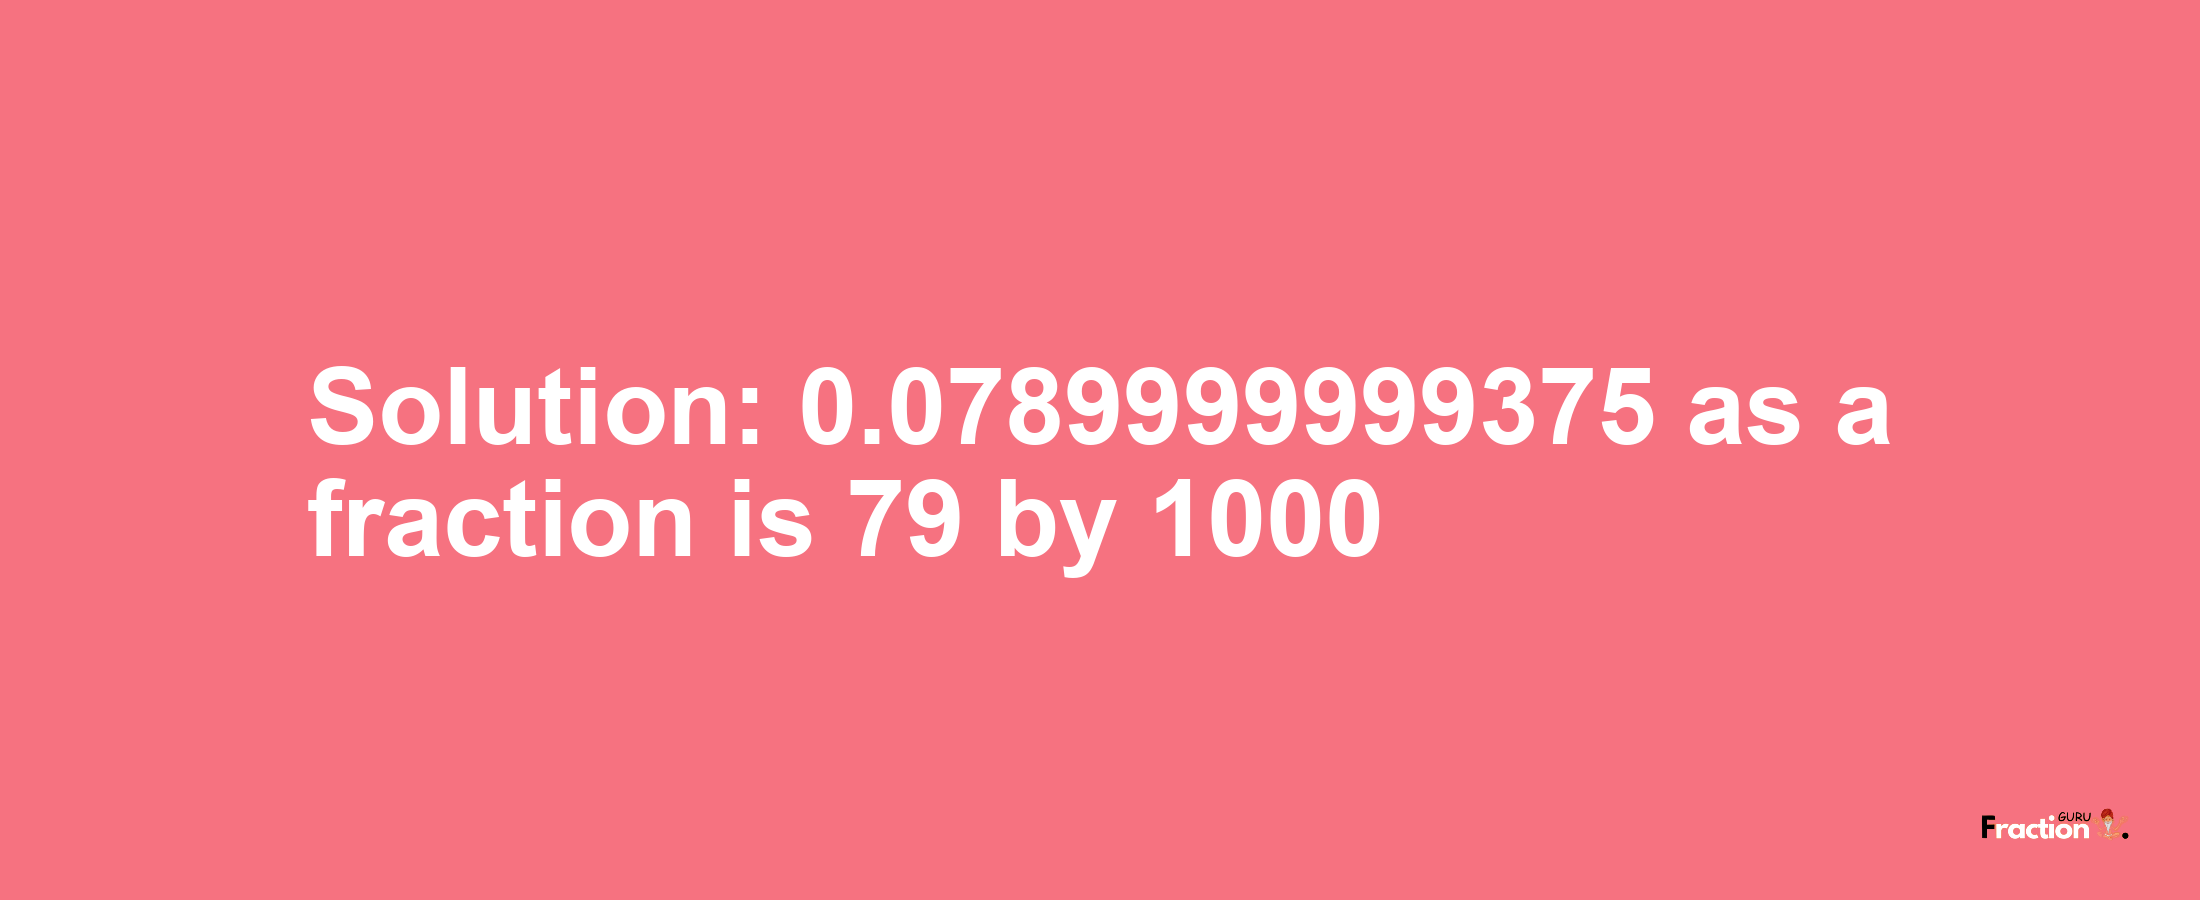 Solution:0.0789999999375 as a fraction is 79/1000